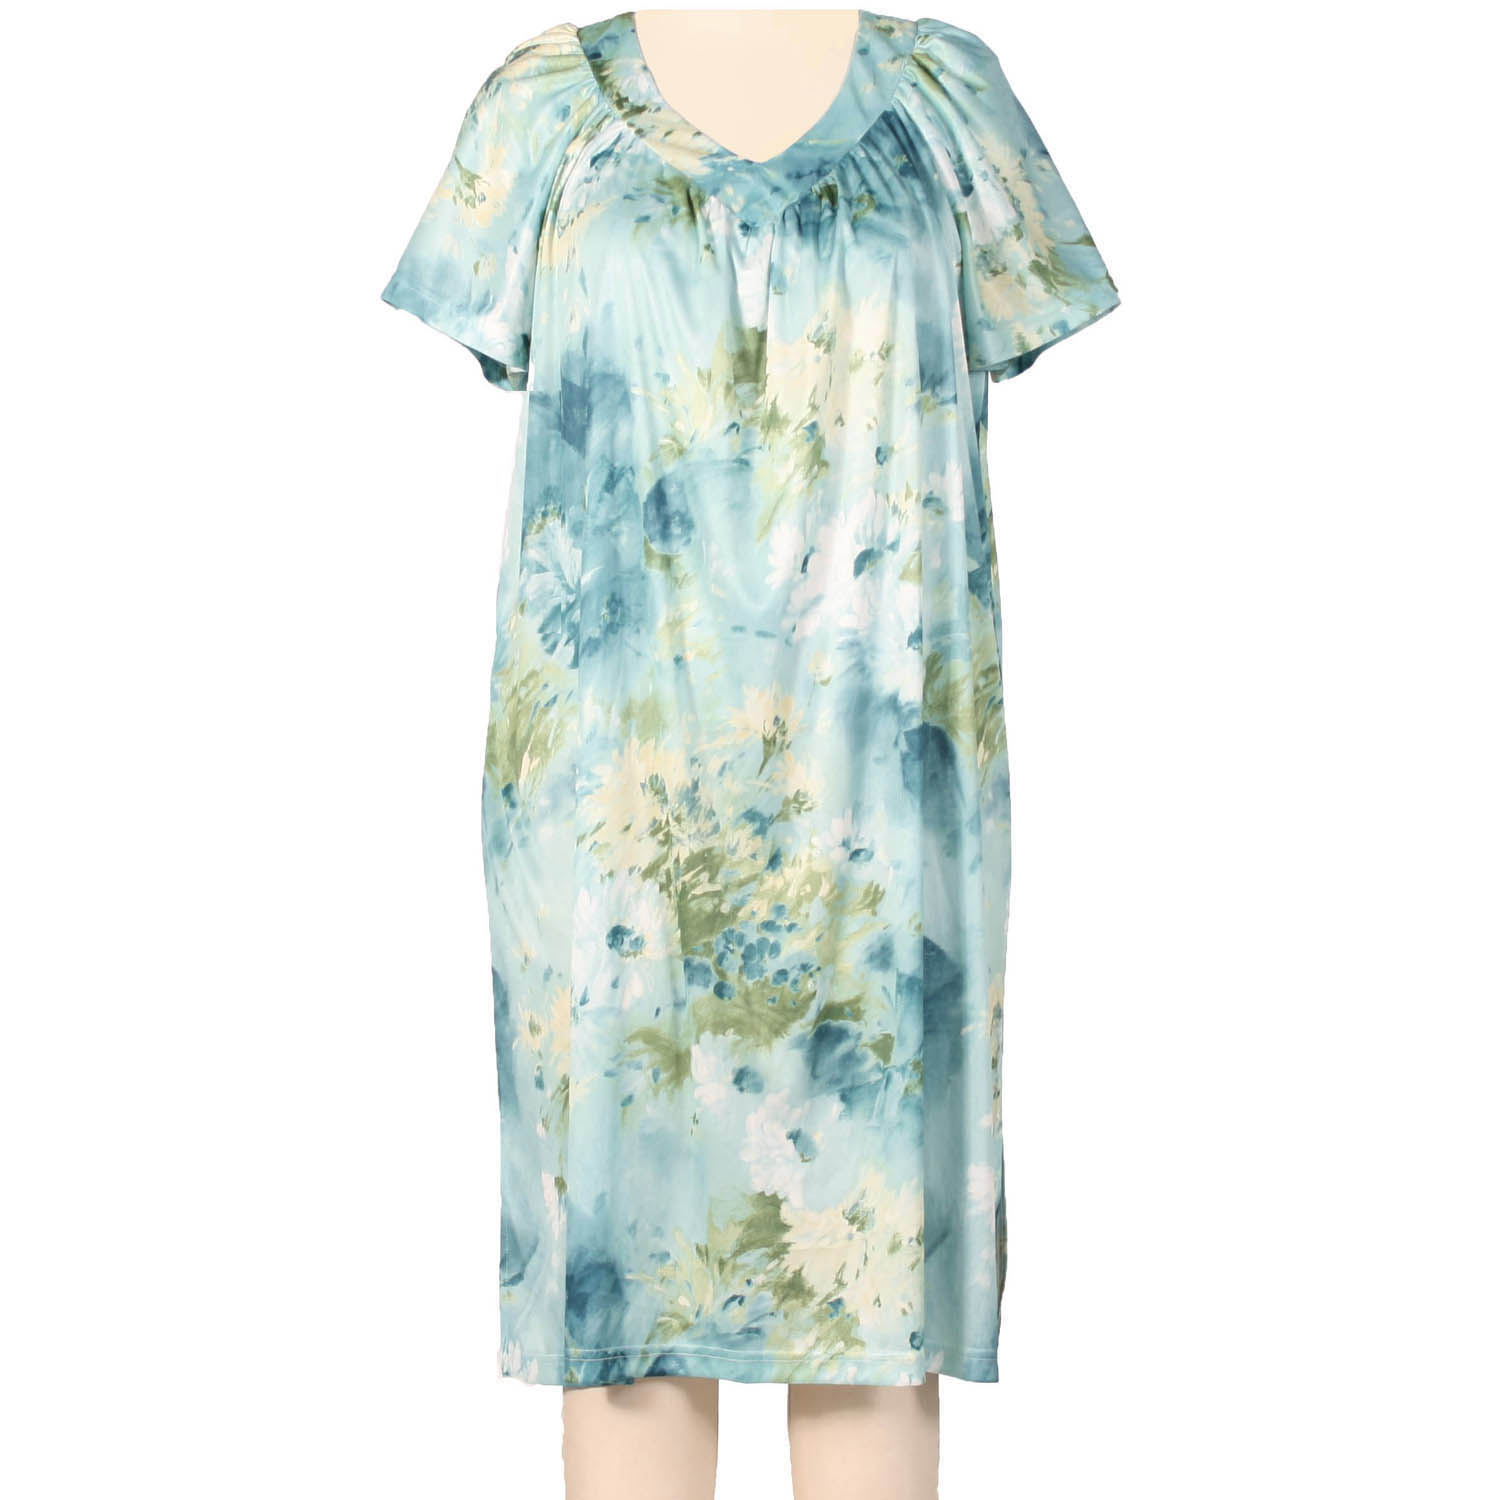 A Personal Touch Watercolor Floral Women's Plus Size Lounging Dress